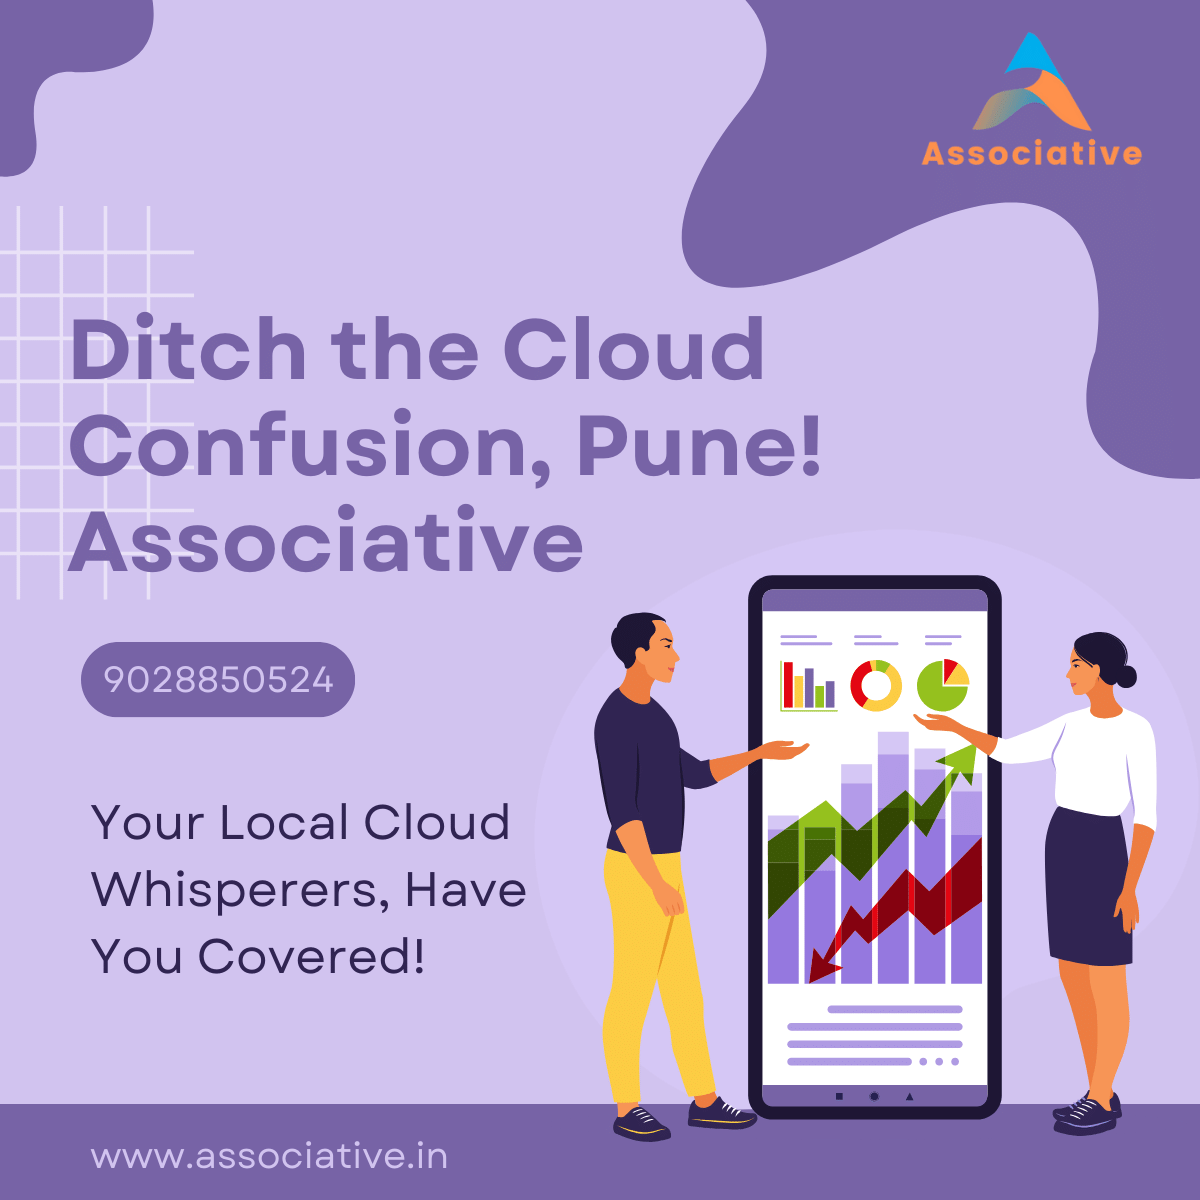 Ditch the Cloud Confusion, Pune! Associative, Your Local Cloud Whisperers, Have You Covered!